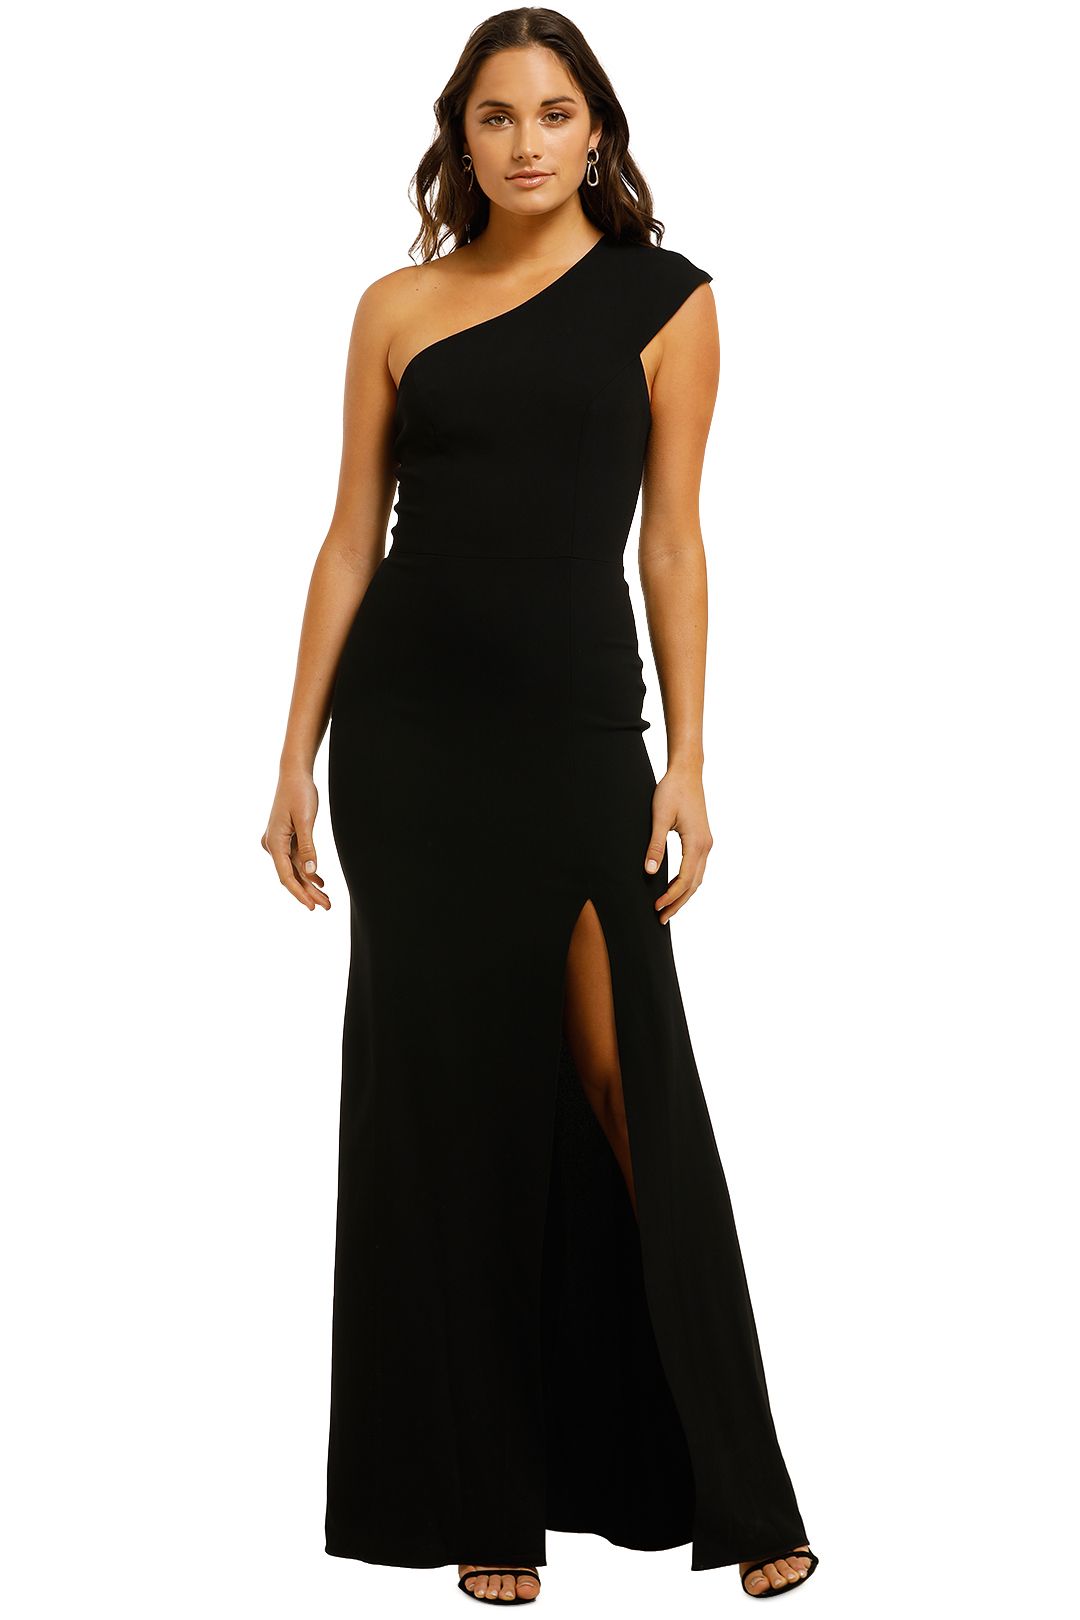 Elixer Gown in Black by Ginger and Smart for Hire | GlamCorner